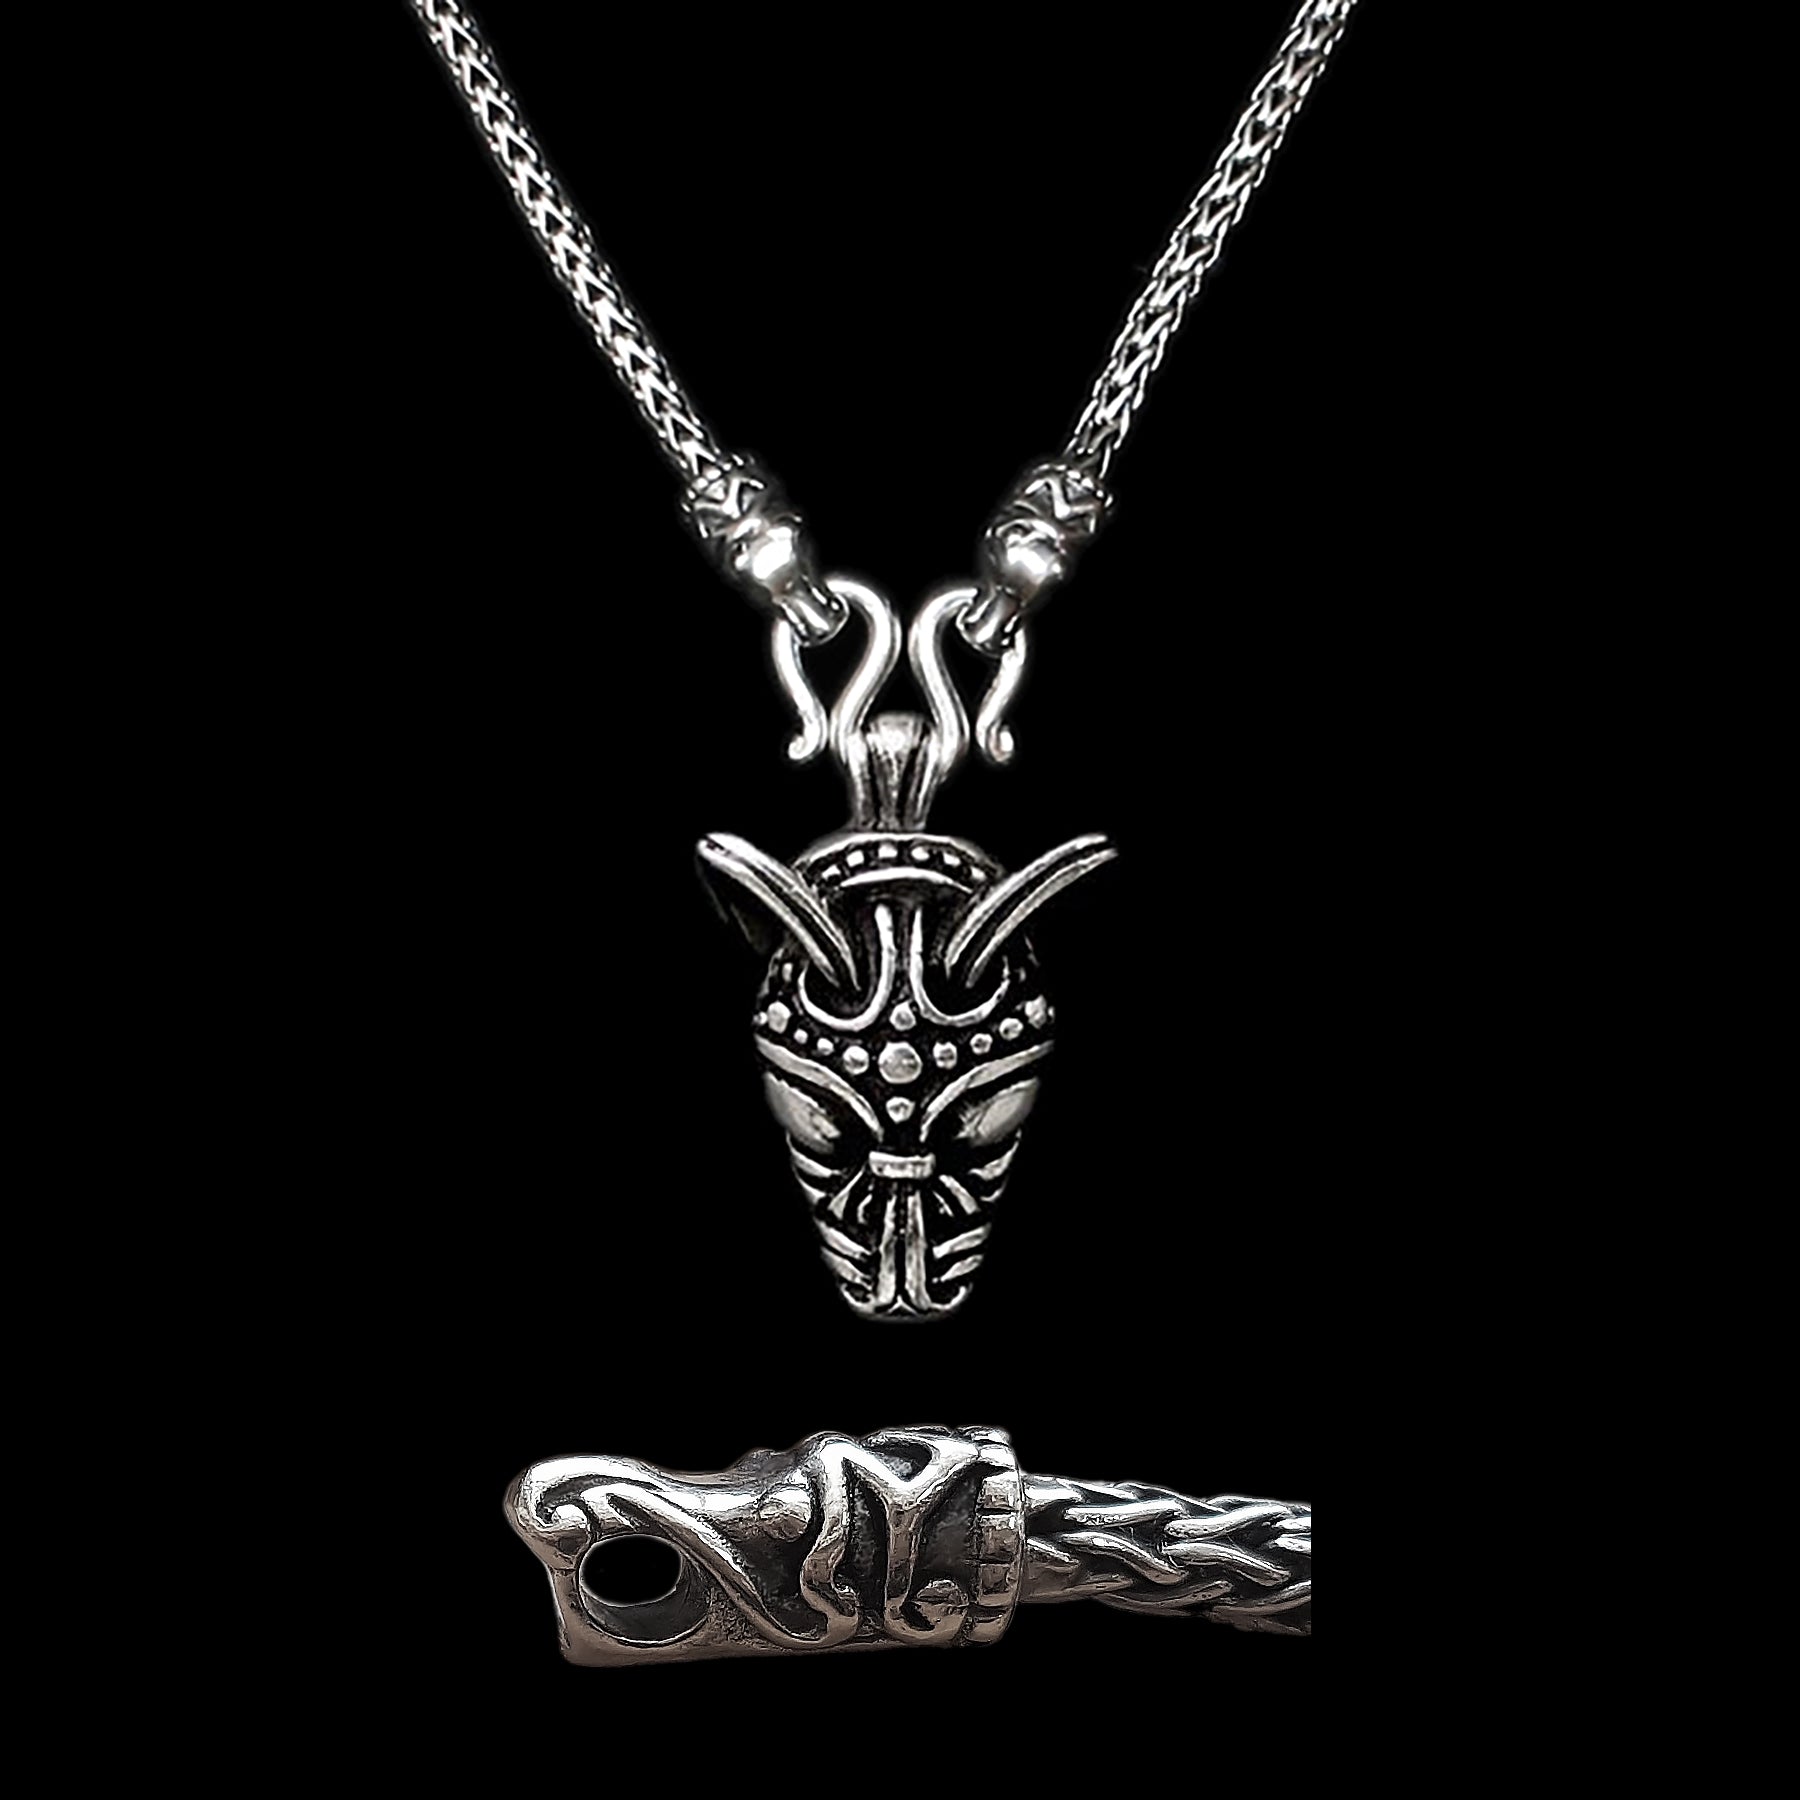 Sterling Silver Viking Snake Chain Necklace with Gotlandic Dragon Heads & Wolf Head Pendant